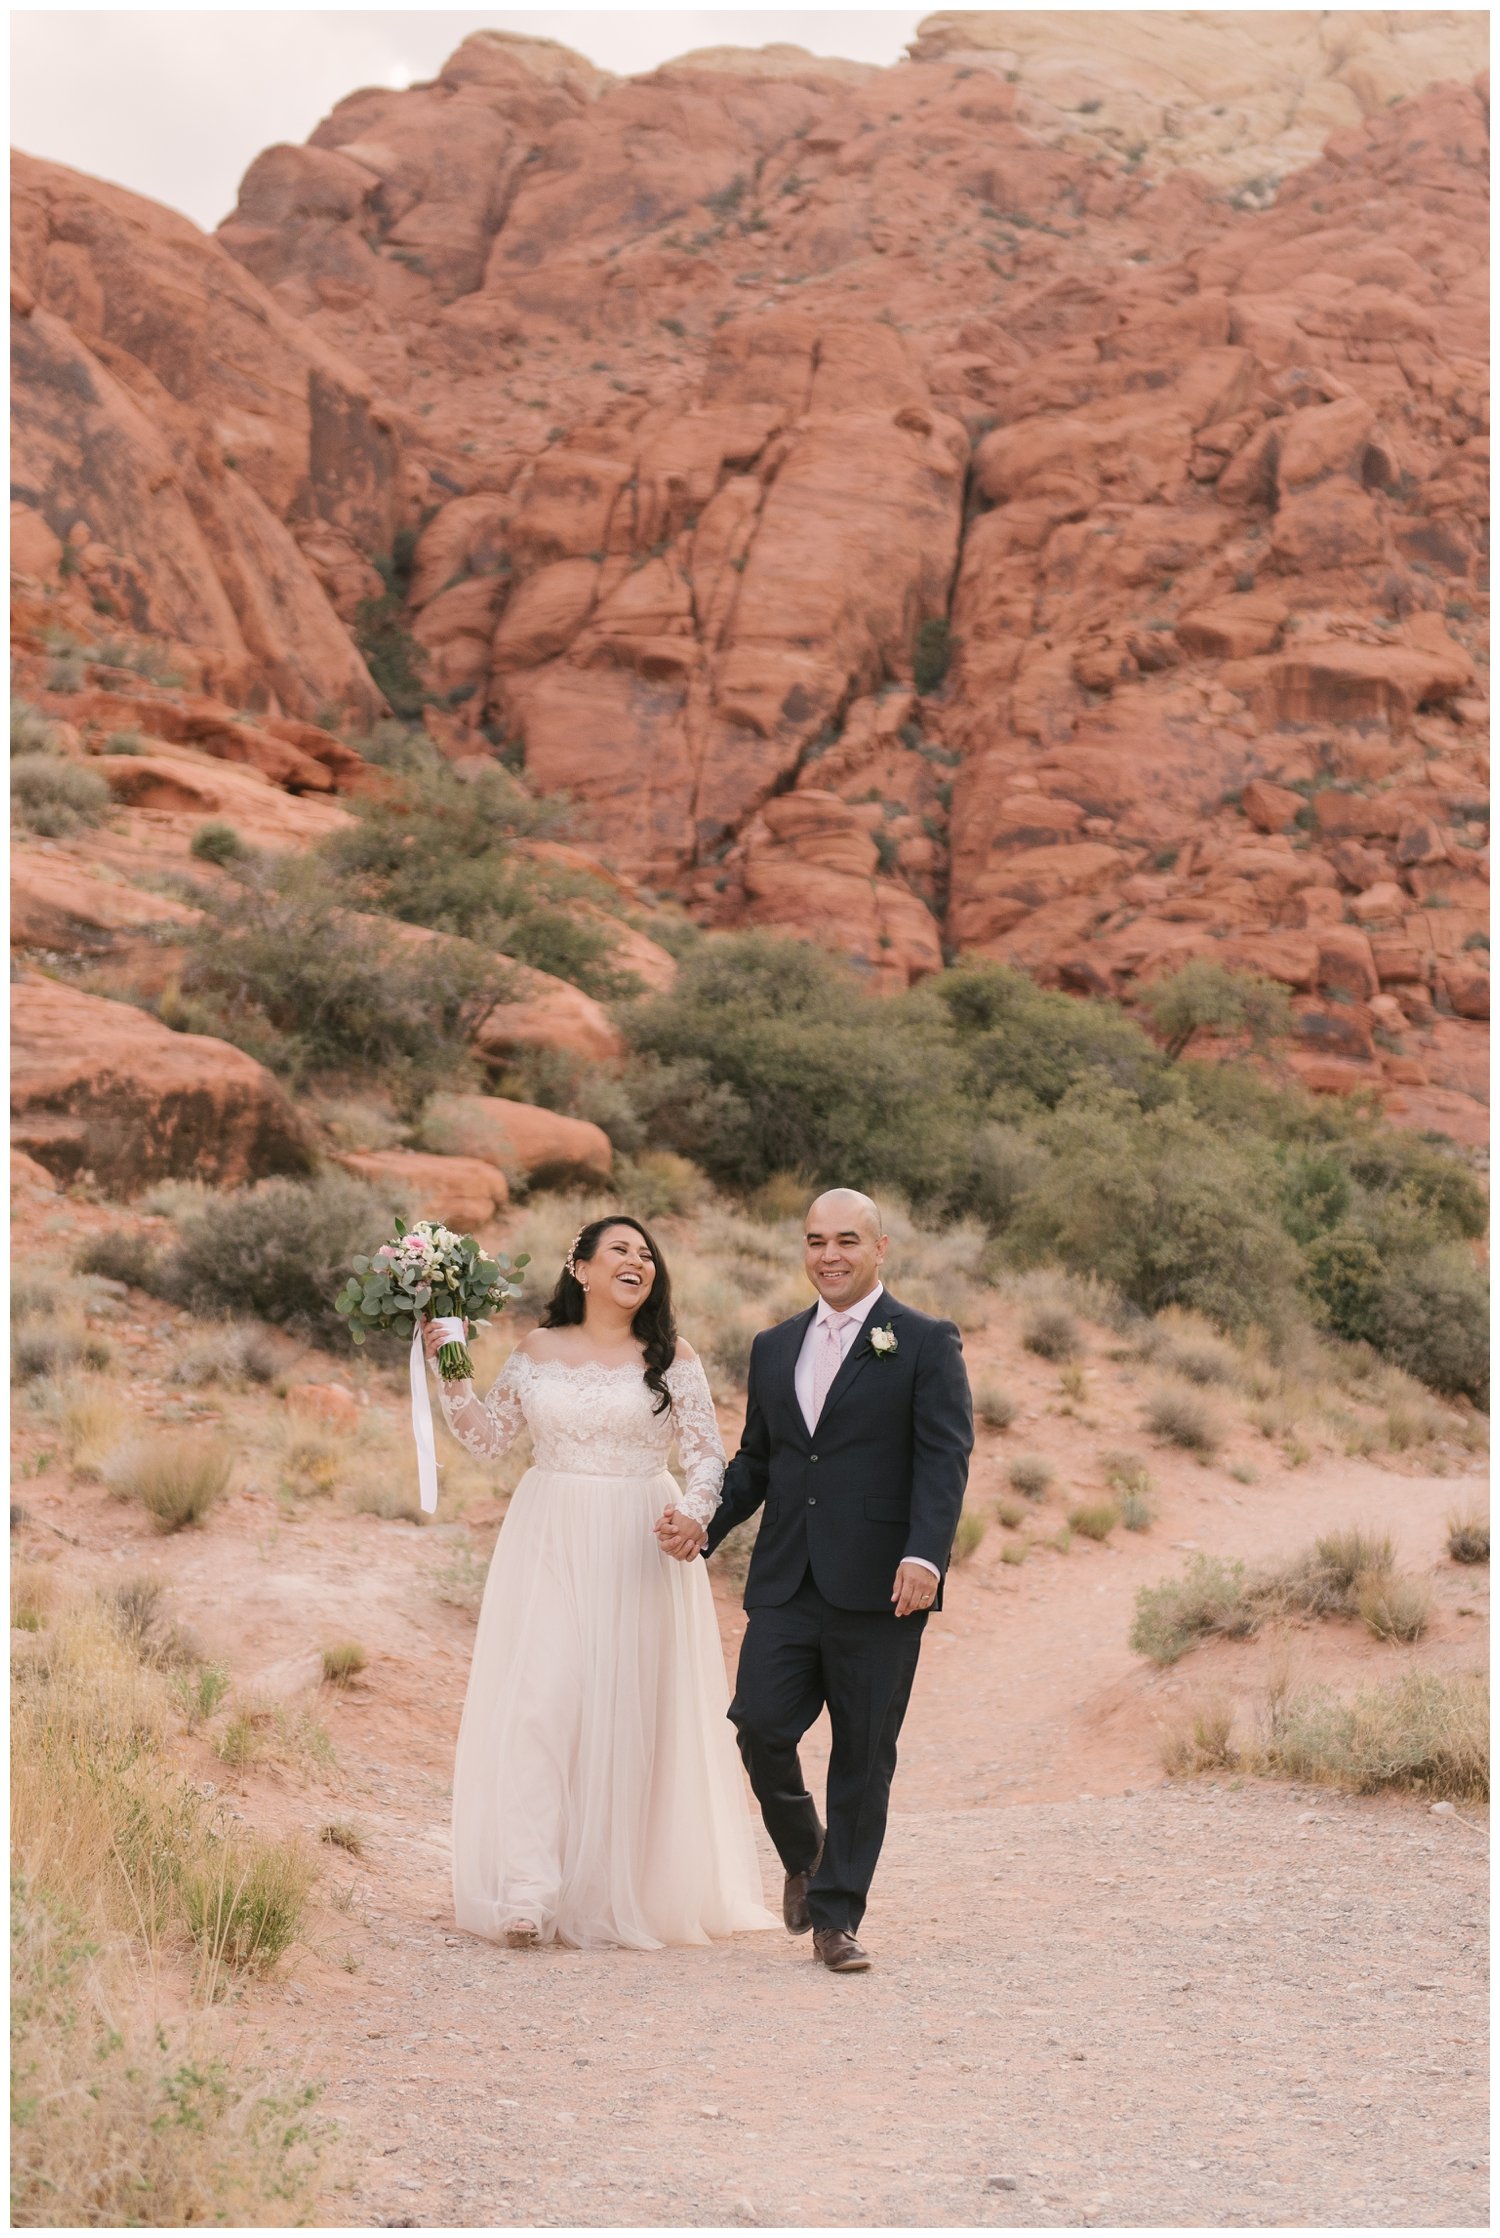 Bride and Groom walking and laughing along red rock canyon